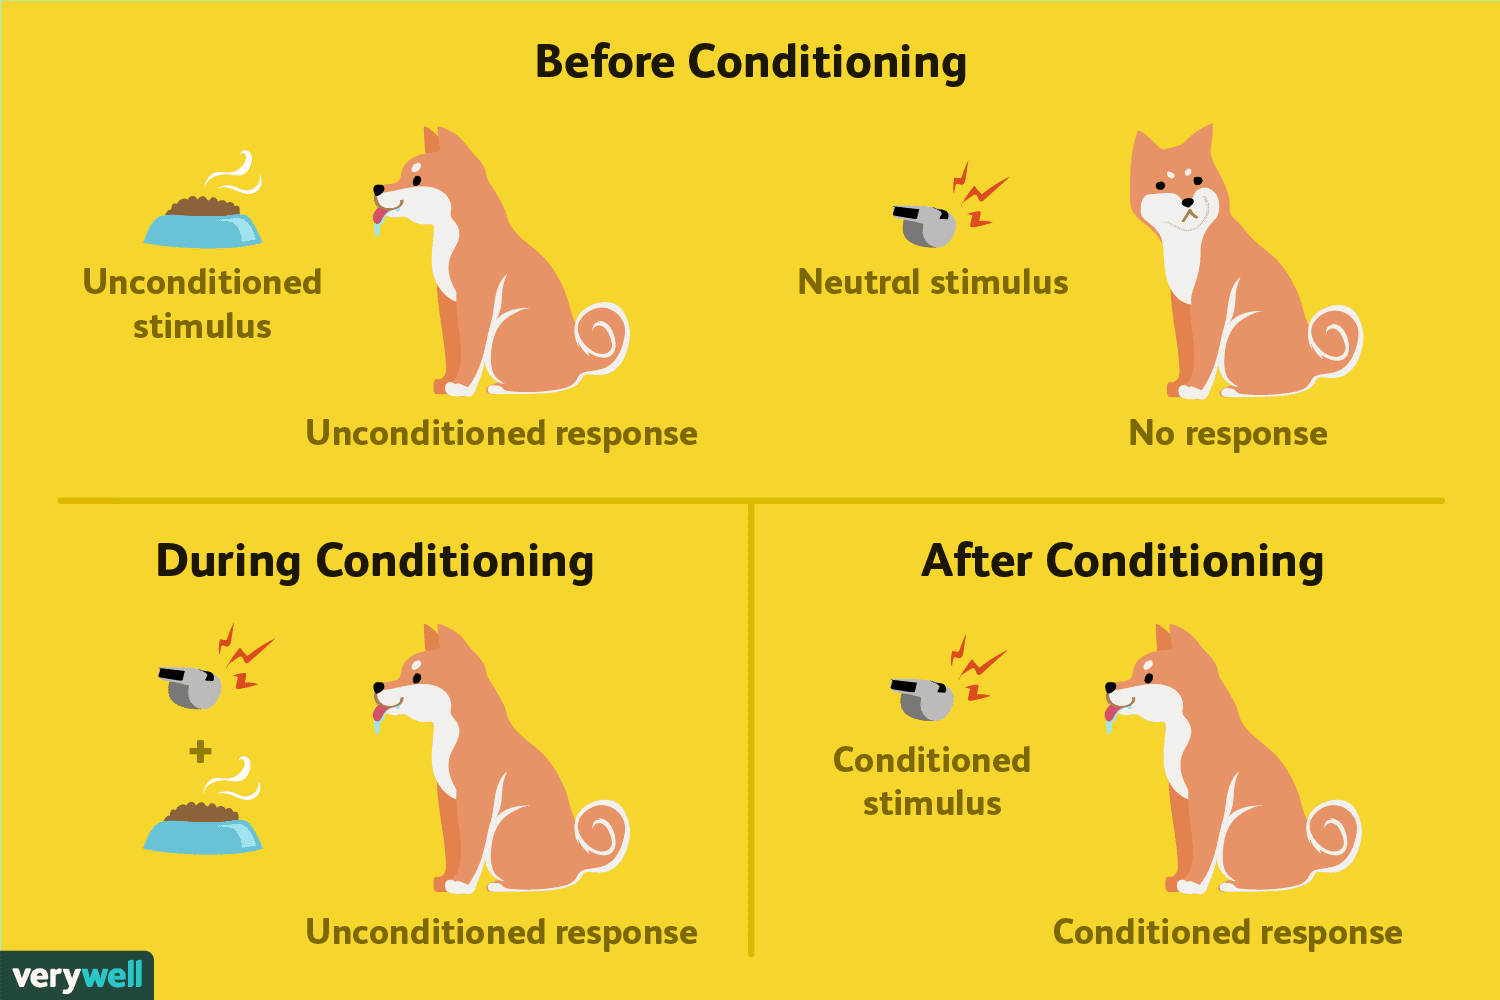 who discovered the basic process of classical conditioning?